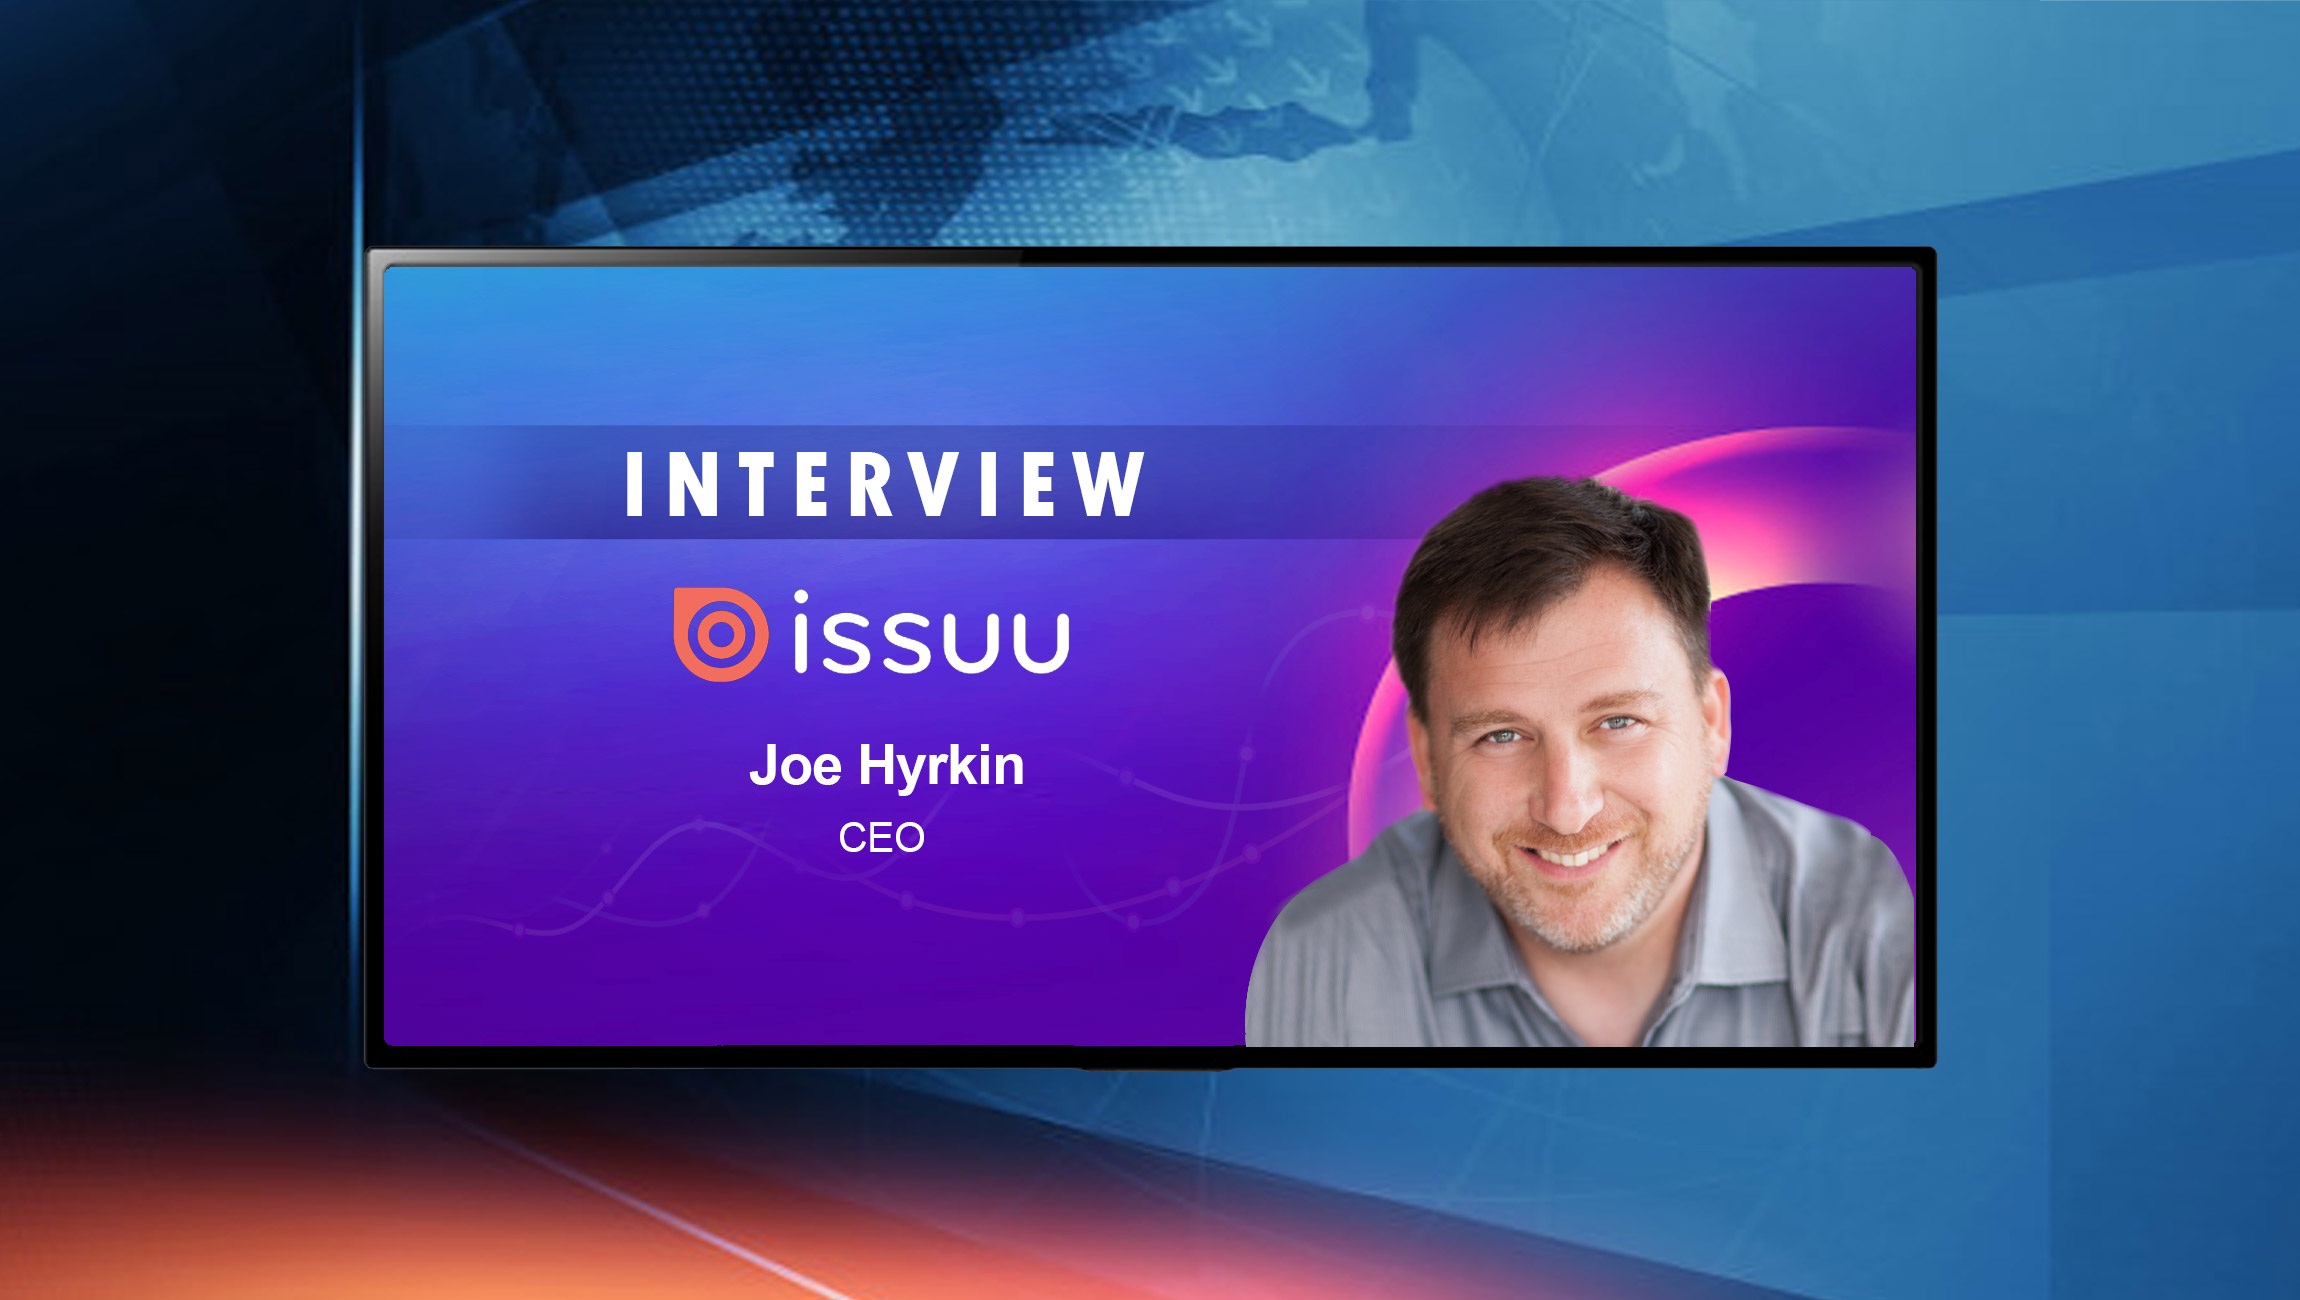 SalesTechStar Interview with Joe Hyrkin, CEO of Issuu Marketing and Sales Tricks for a Remote World